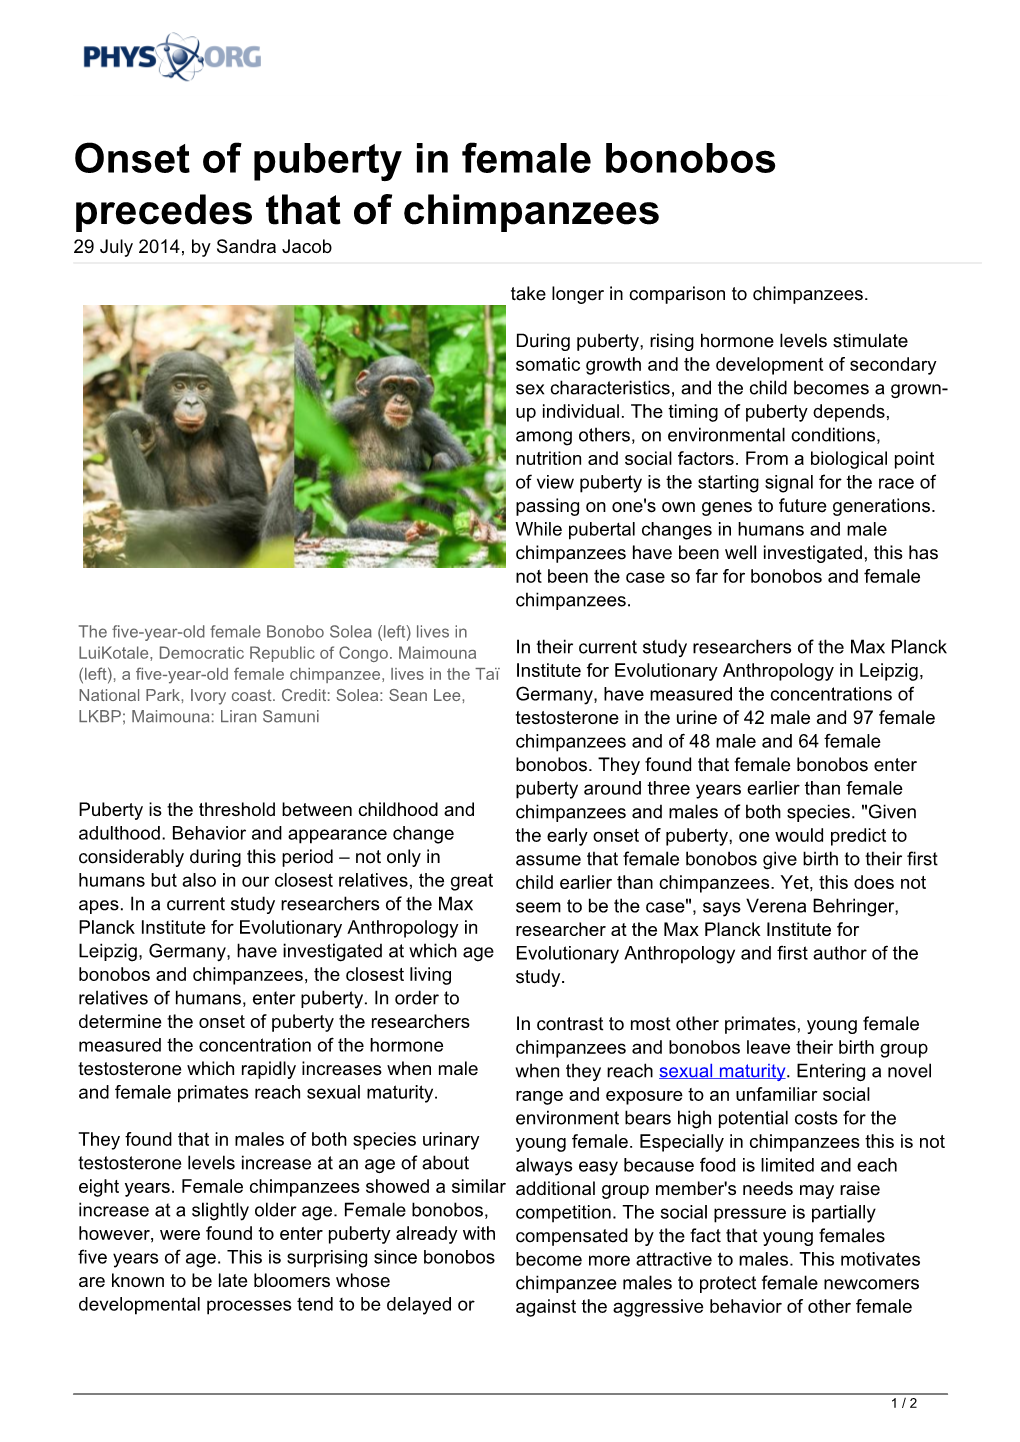 Onset of Puberty in Female Bonobos Precedes That of Chimpanzees 29 July 2014, by Sandra Jacob